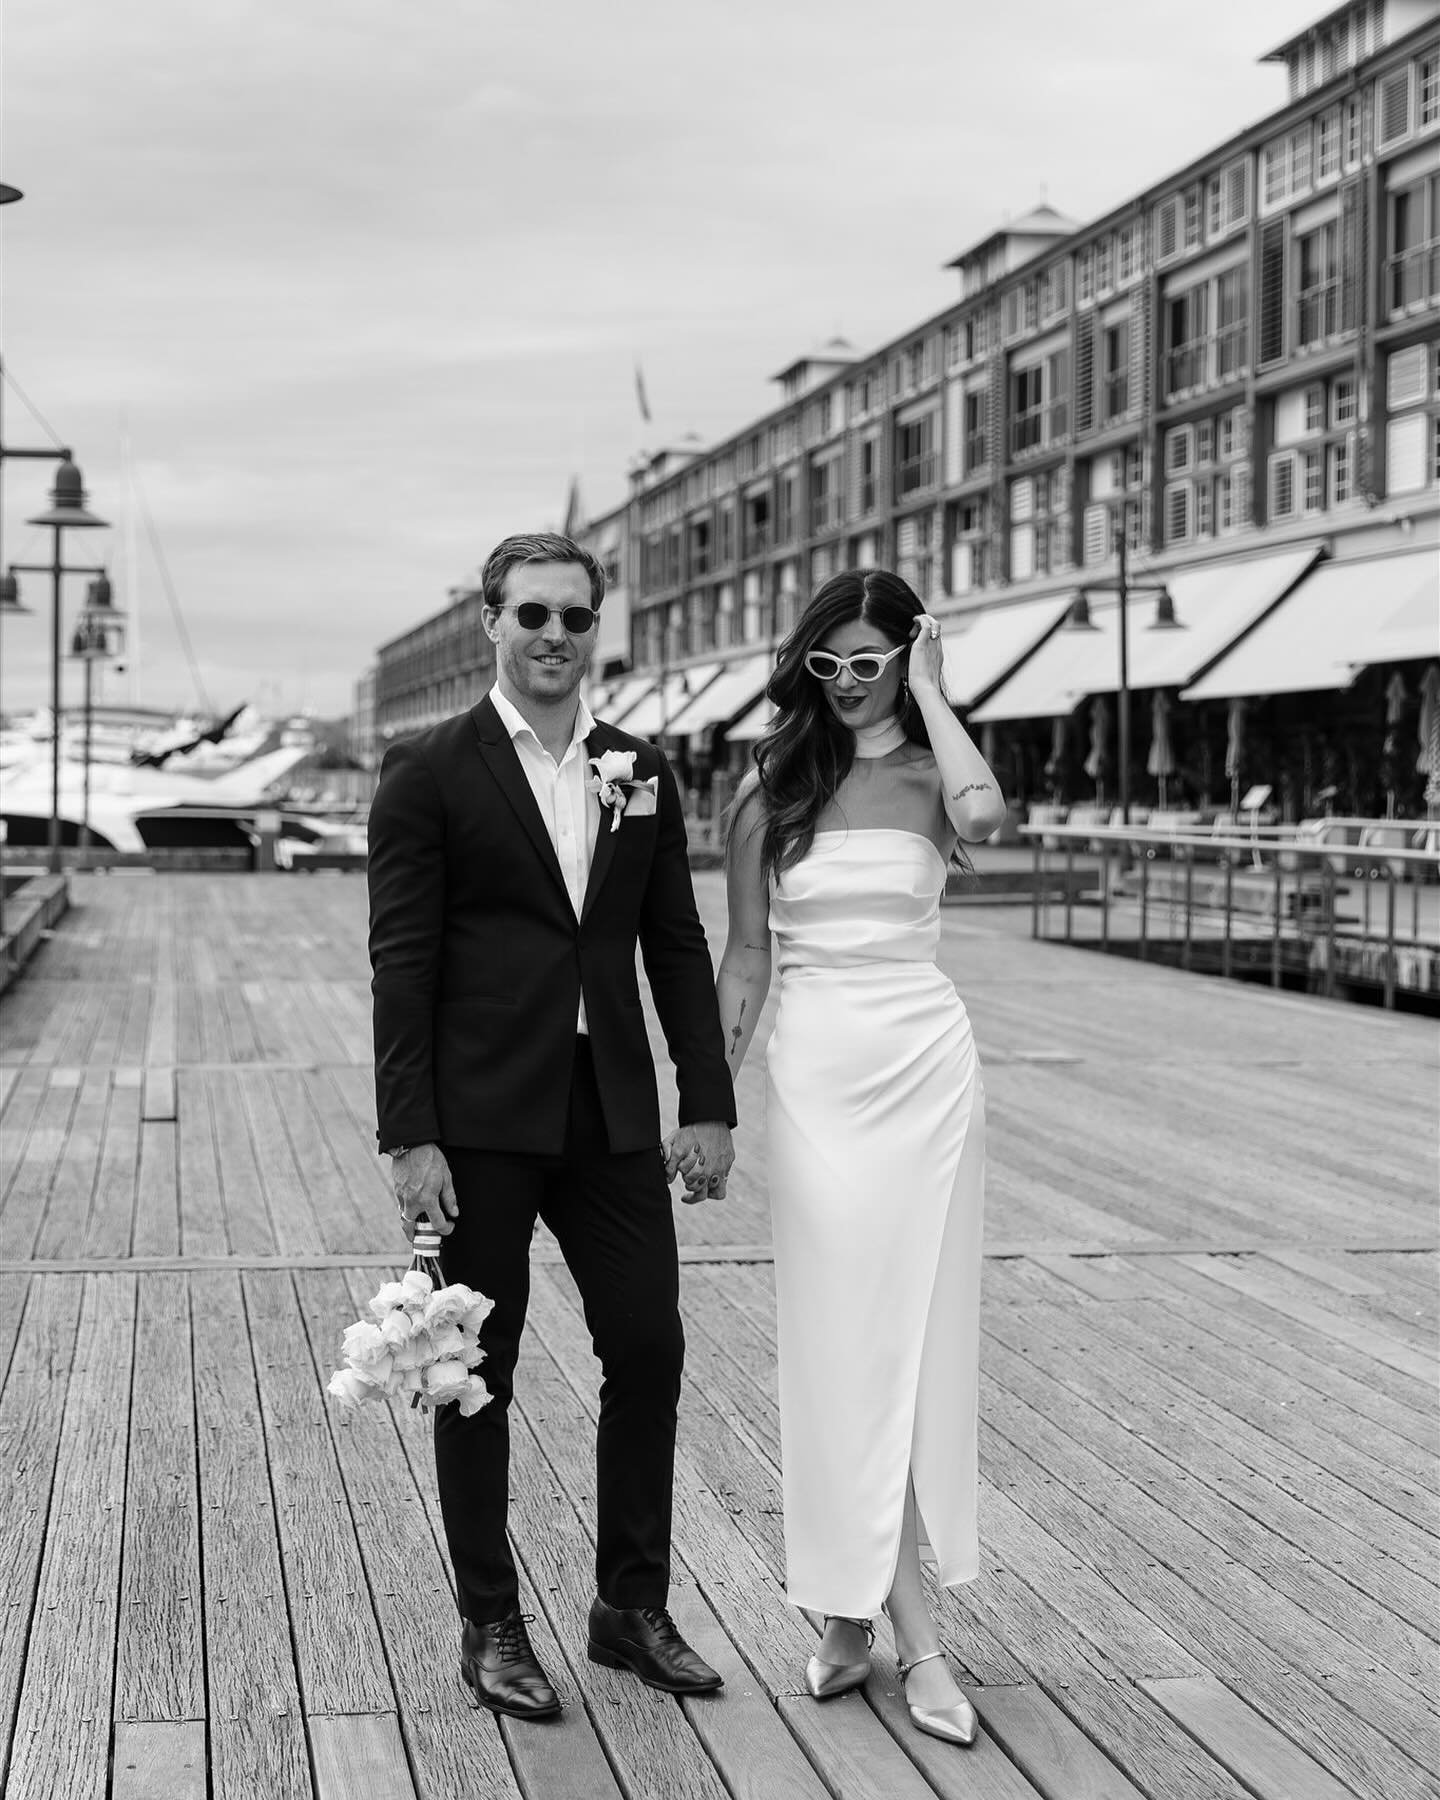 Lex + Evan &hearts;️
Just over a year ago, married in an intimate ceremony in front of their loved ones, zipping through Sydney in a 1960s red Mustang, hair flowing in the wind and smiles that couldn&rsquo;t be wiped off their faces. @lexduff, it was